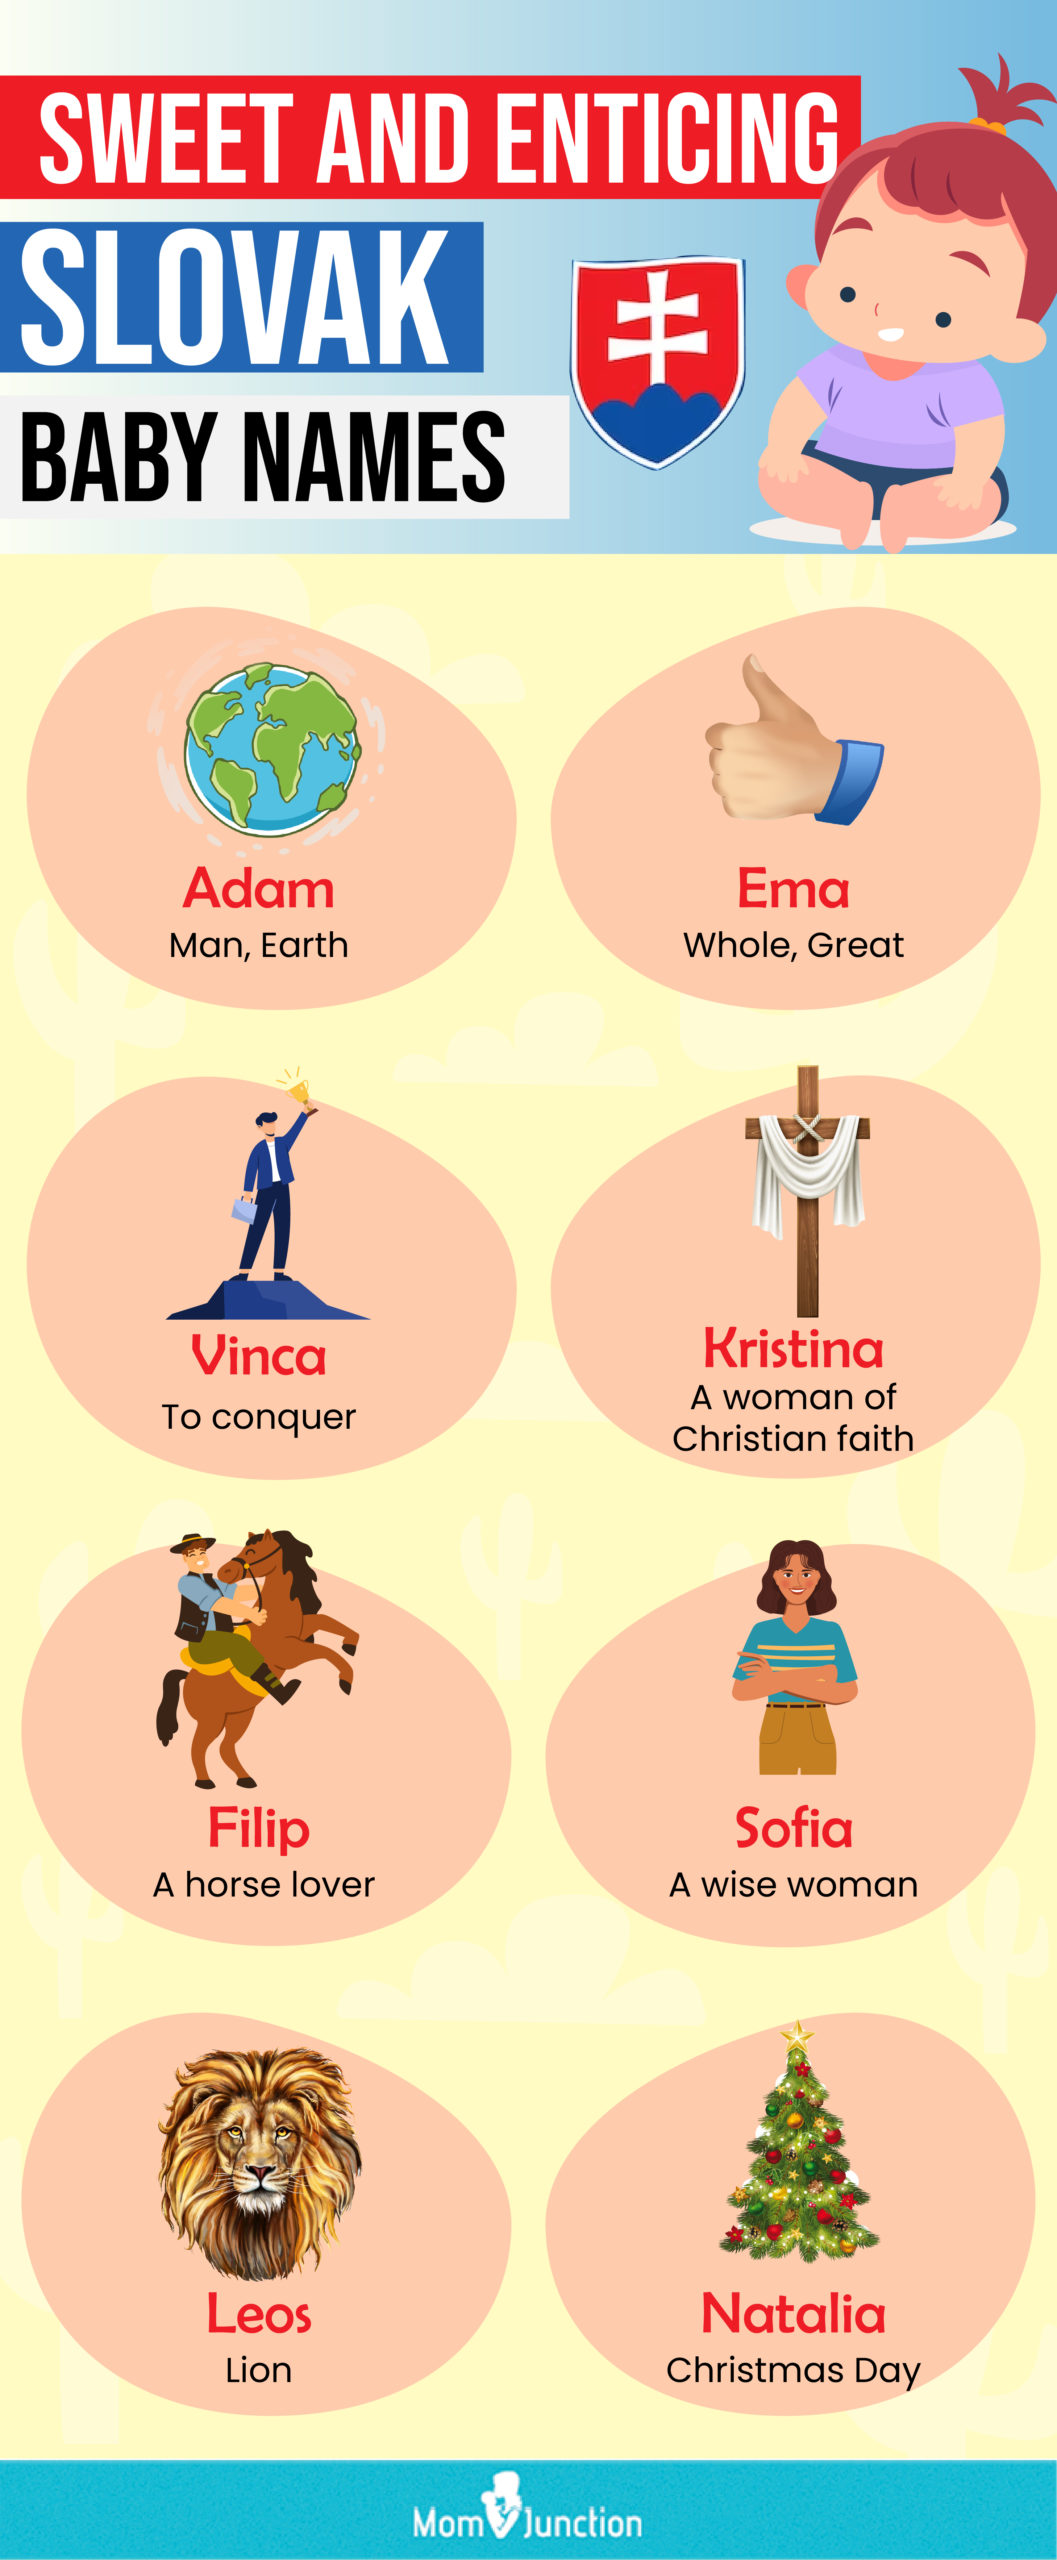 appealing slovak baby names to explore (infographic)